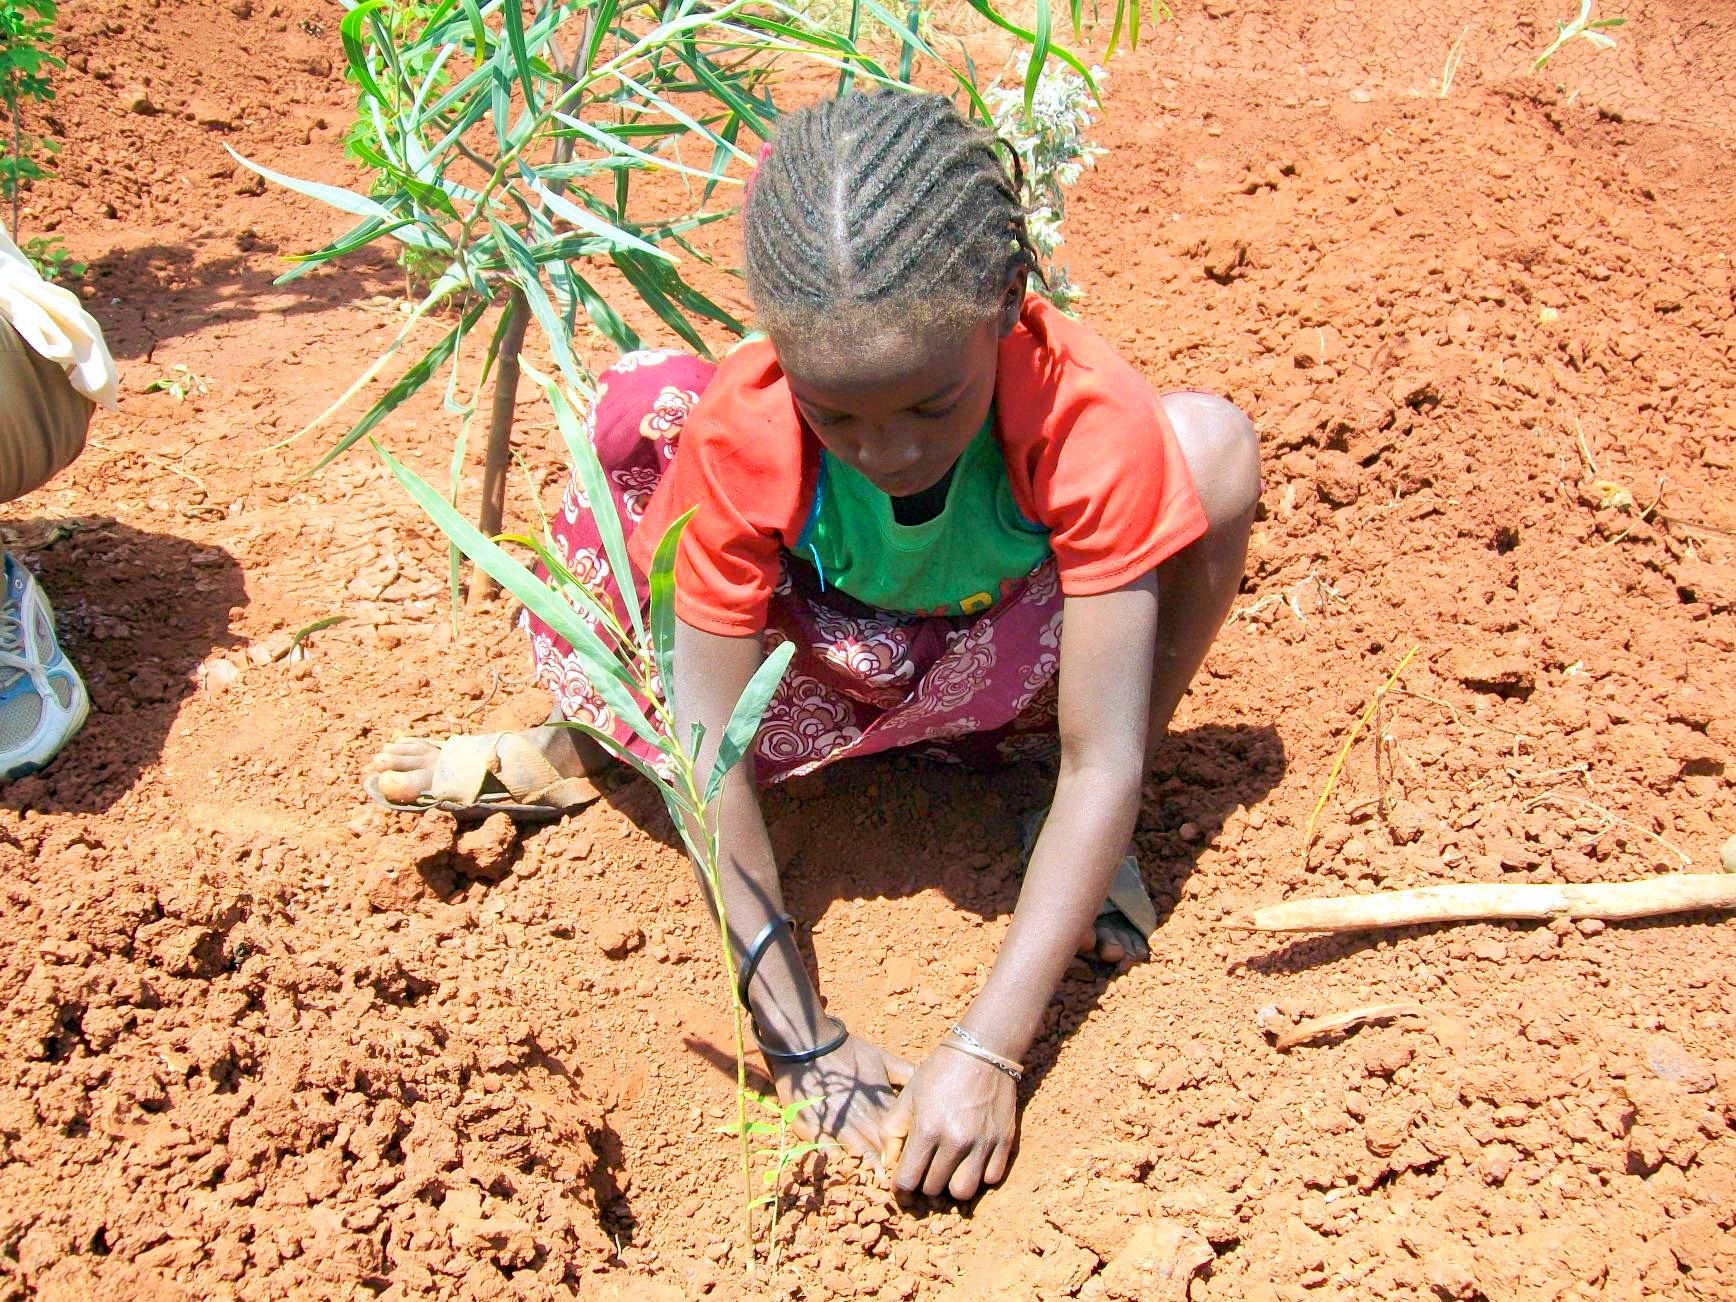 Feudal past still discourages Ethiopia's farmers from planting trees - Forests